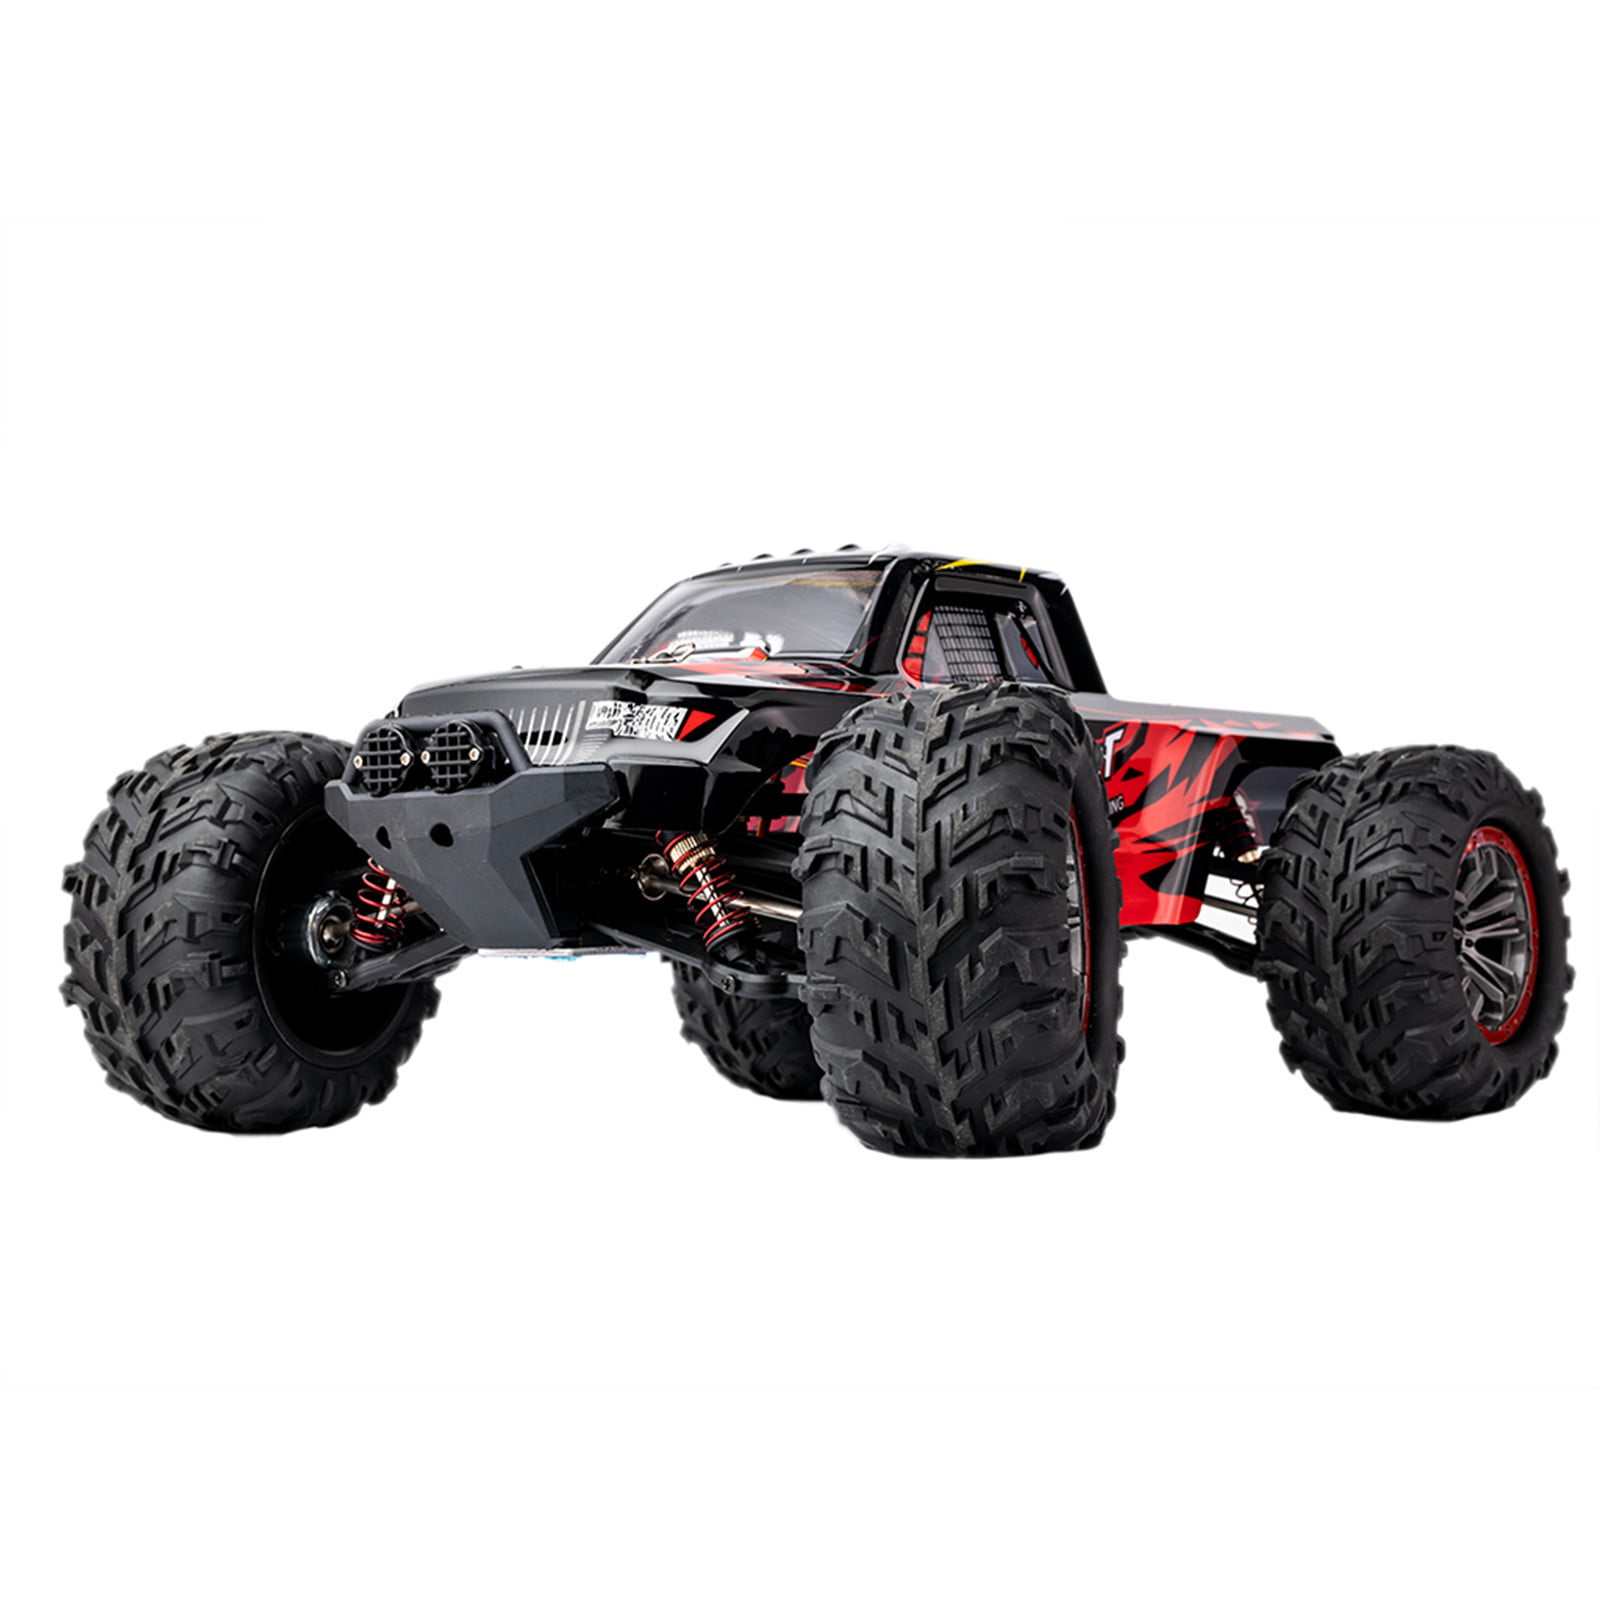 X04 Brushless 2.4G 1:10 4WD 60km/h High-speed Off-road Truck RC Car Model RTR US 